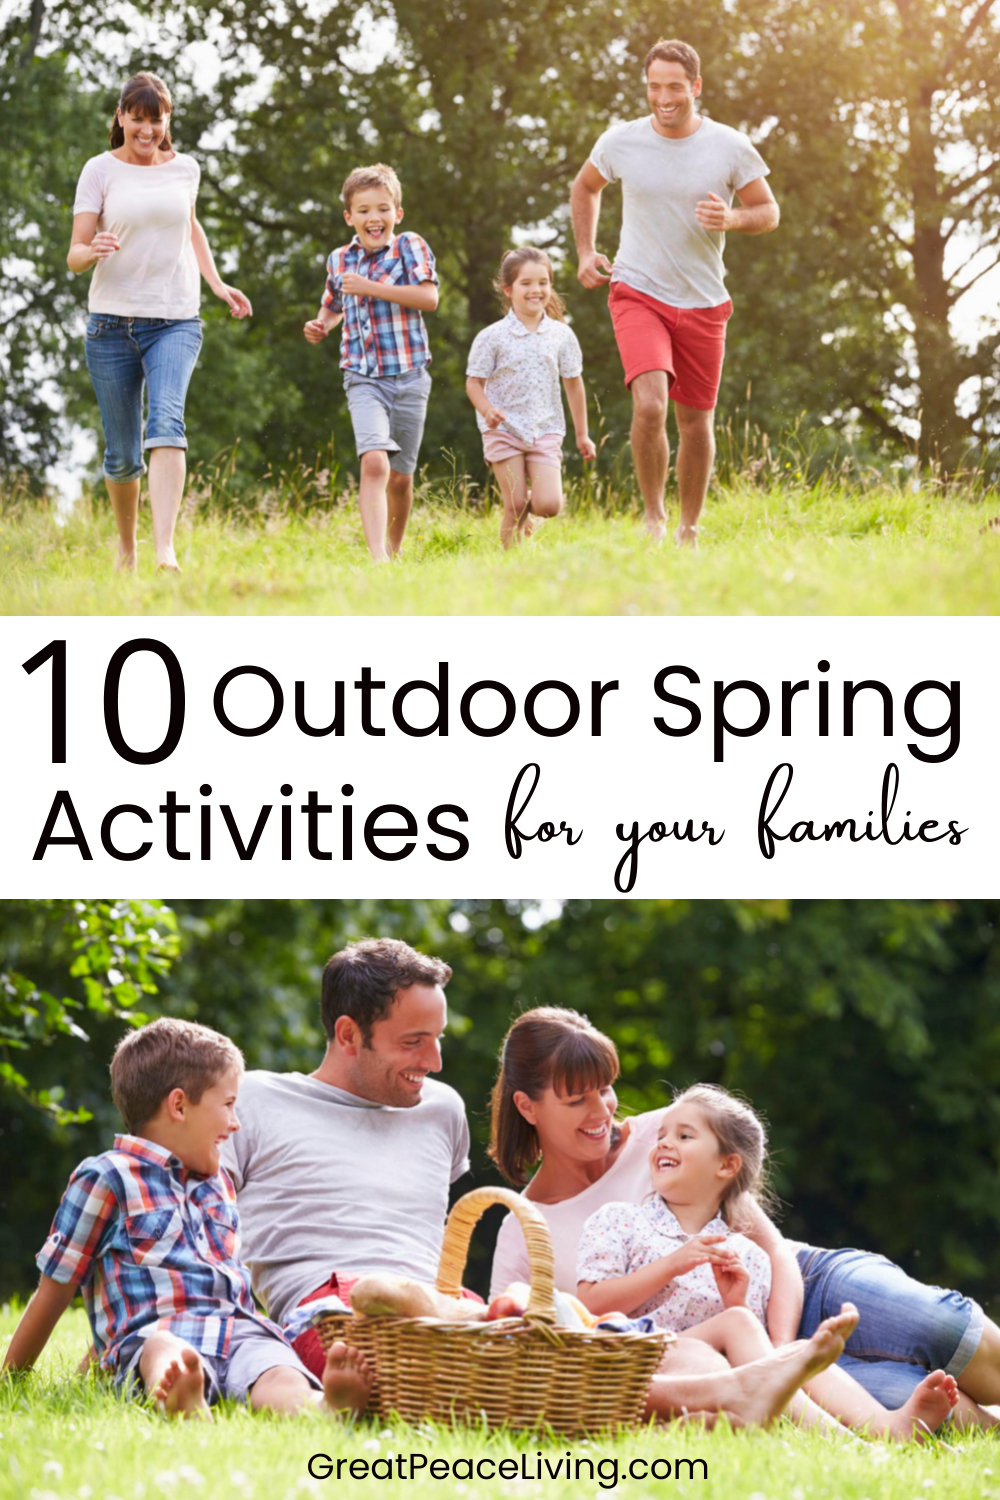 Outdoor Spring activities for your family | GreatPeaceLiving.com #family #activities